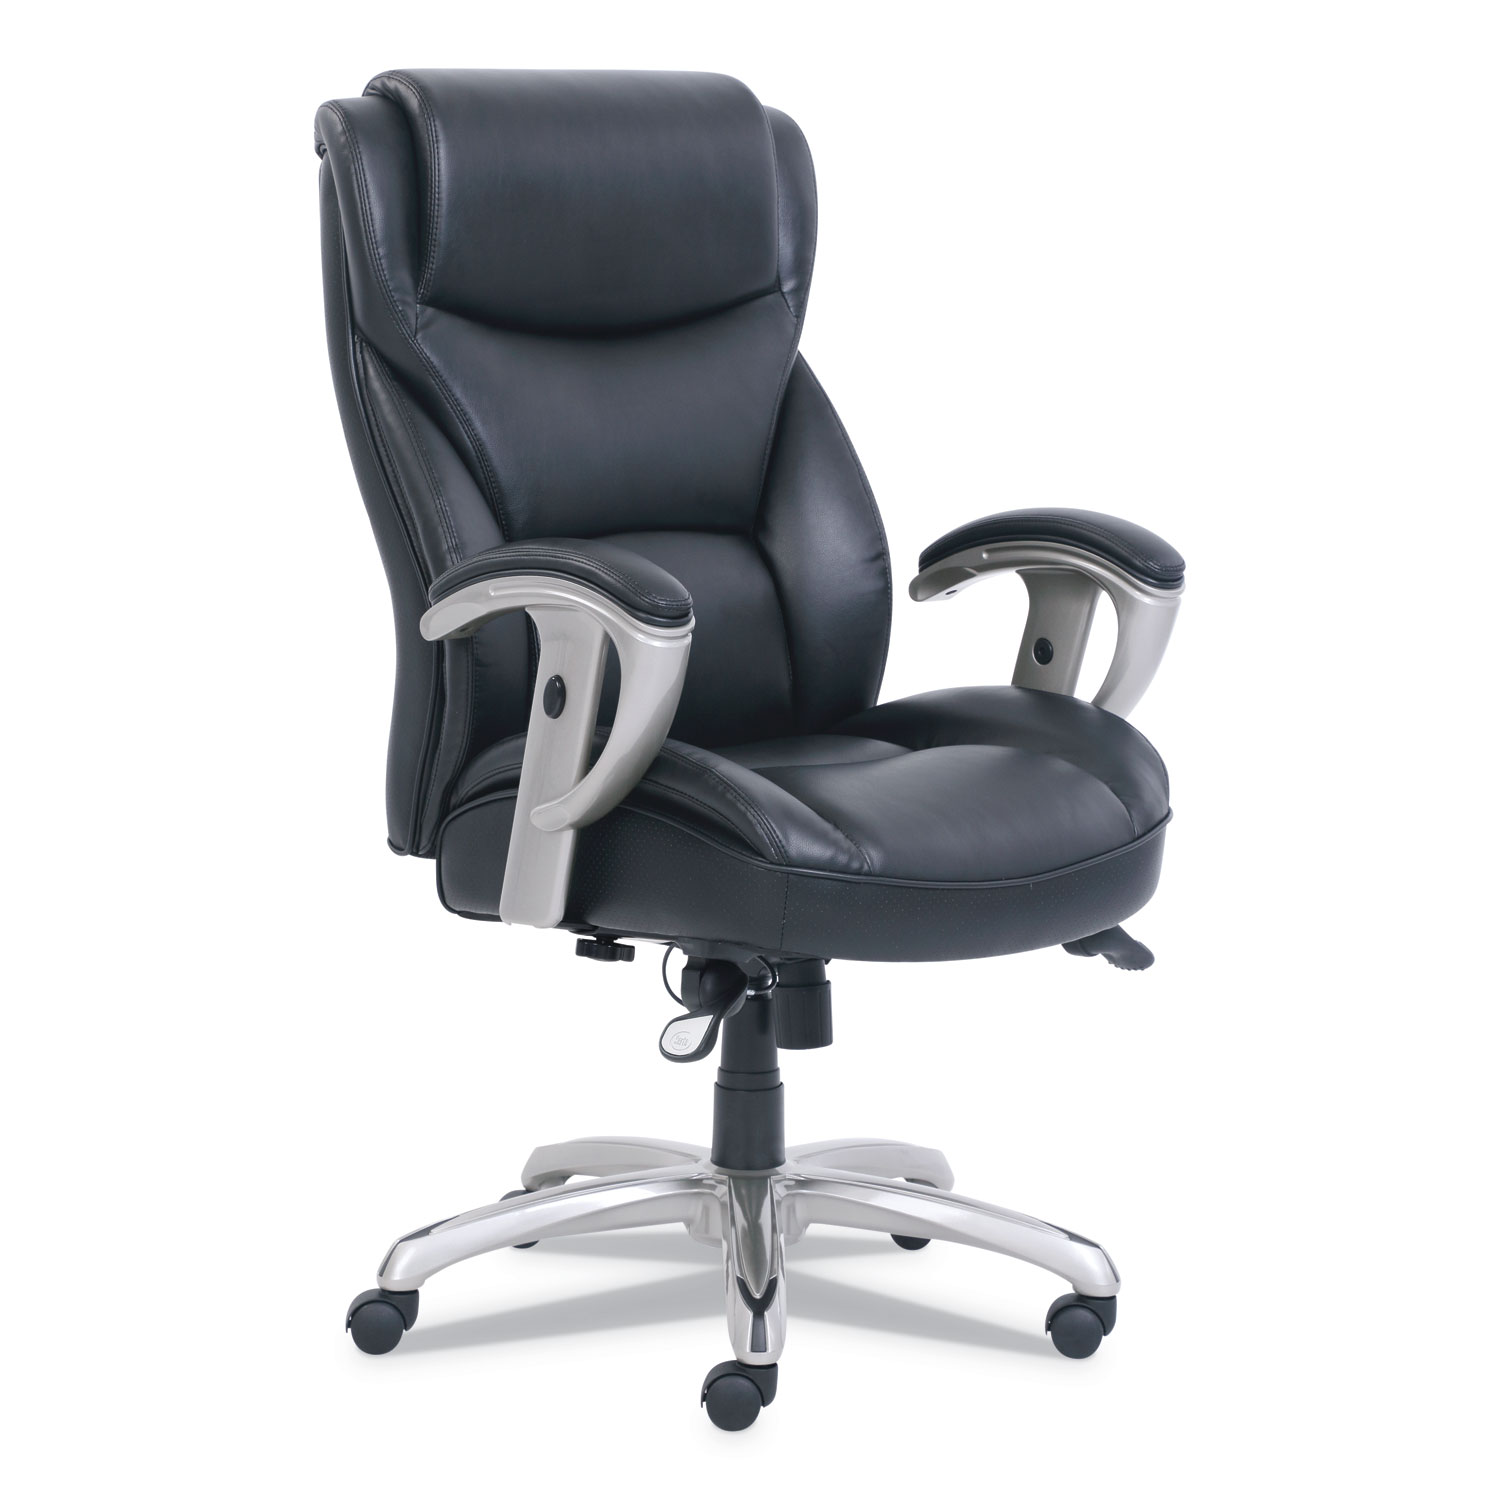  SertaPedic 49416BLK Emerson Big and Tall Task Chair, Supports up to 400 lbs., Black Seat/Black Back, Silver Base (SRJ49416BLK) 